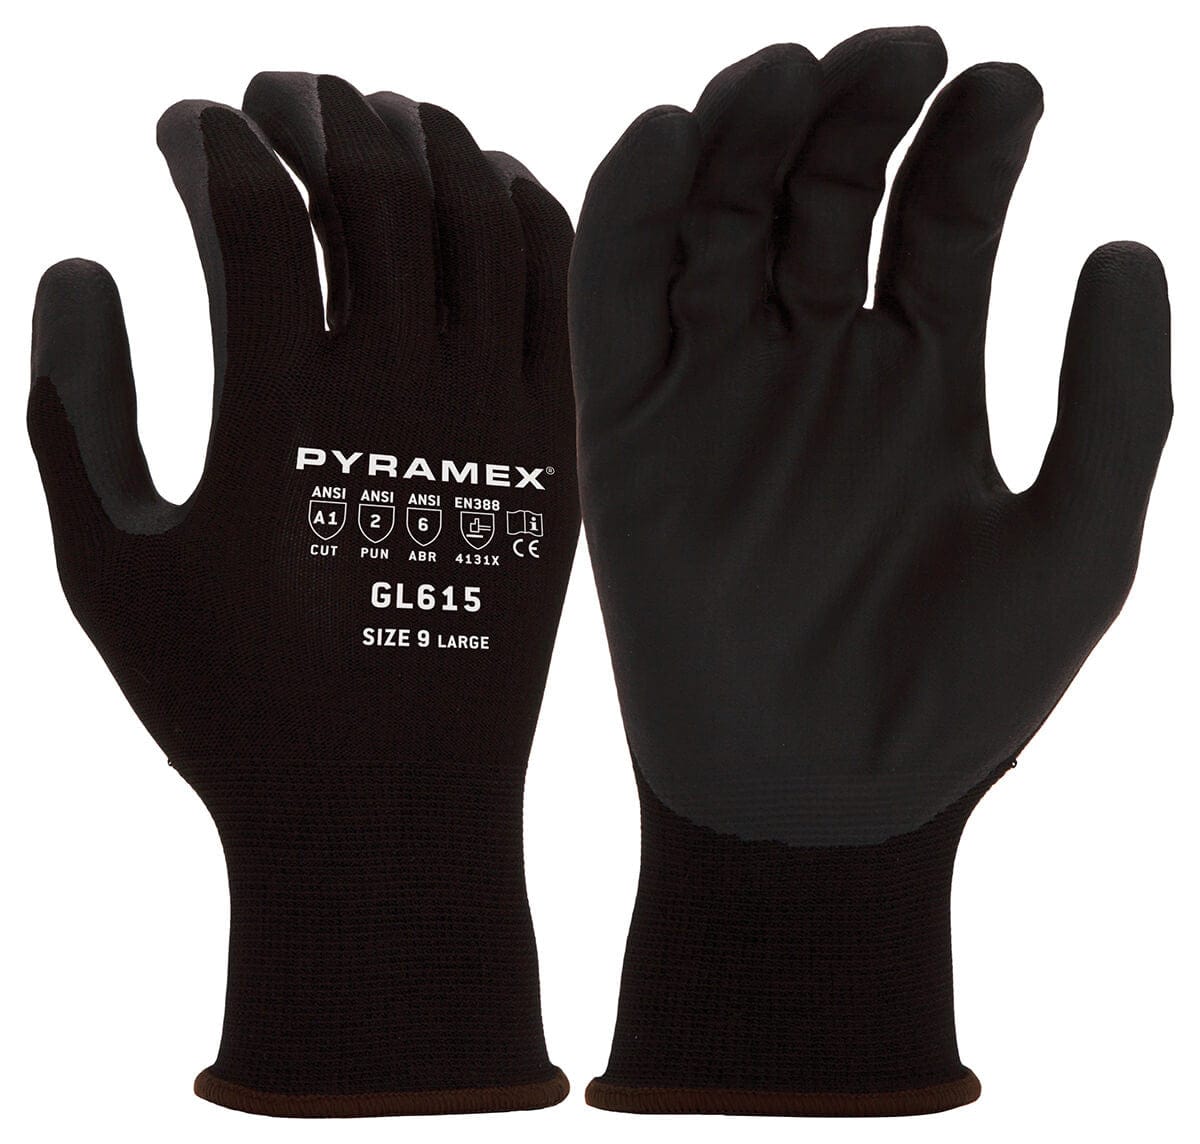 ANSI Level 6 Cut Resistant Gloves for Safety Workwear